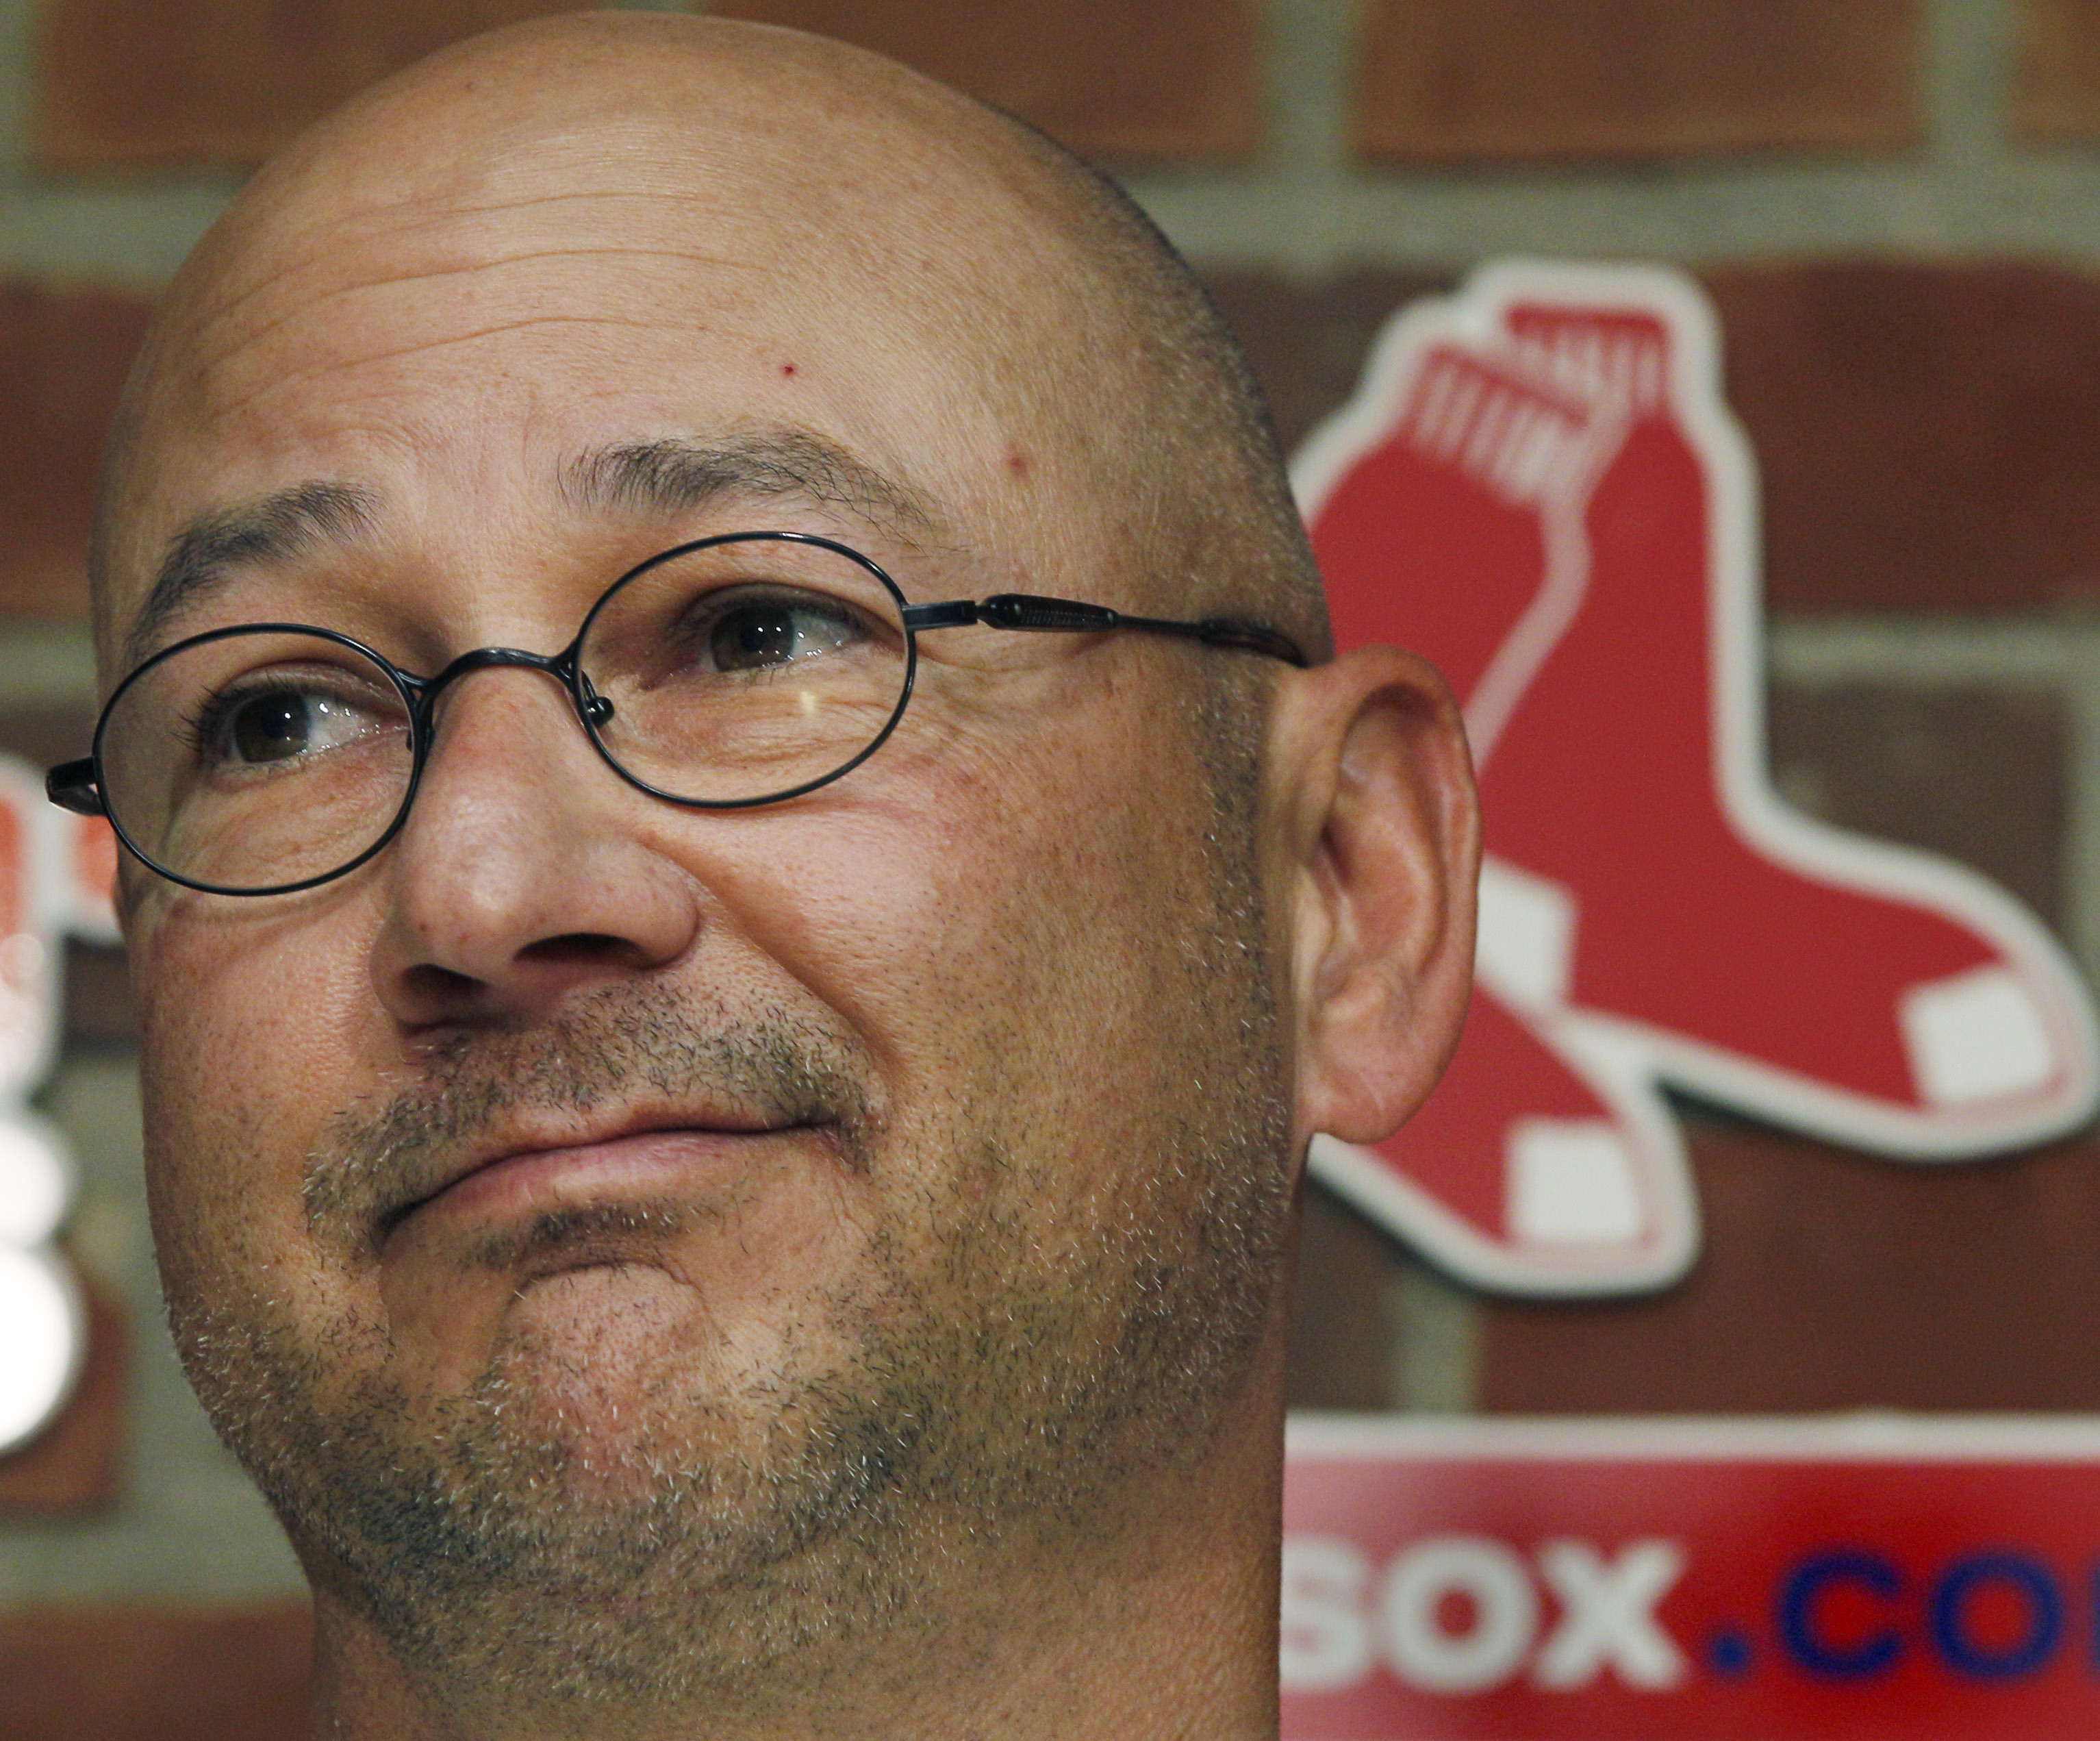 One of game's characters, Guardians manager Terry Francona set to end  career defined by class, touch, Sports